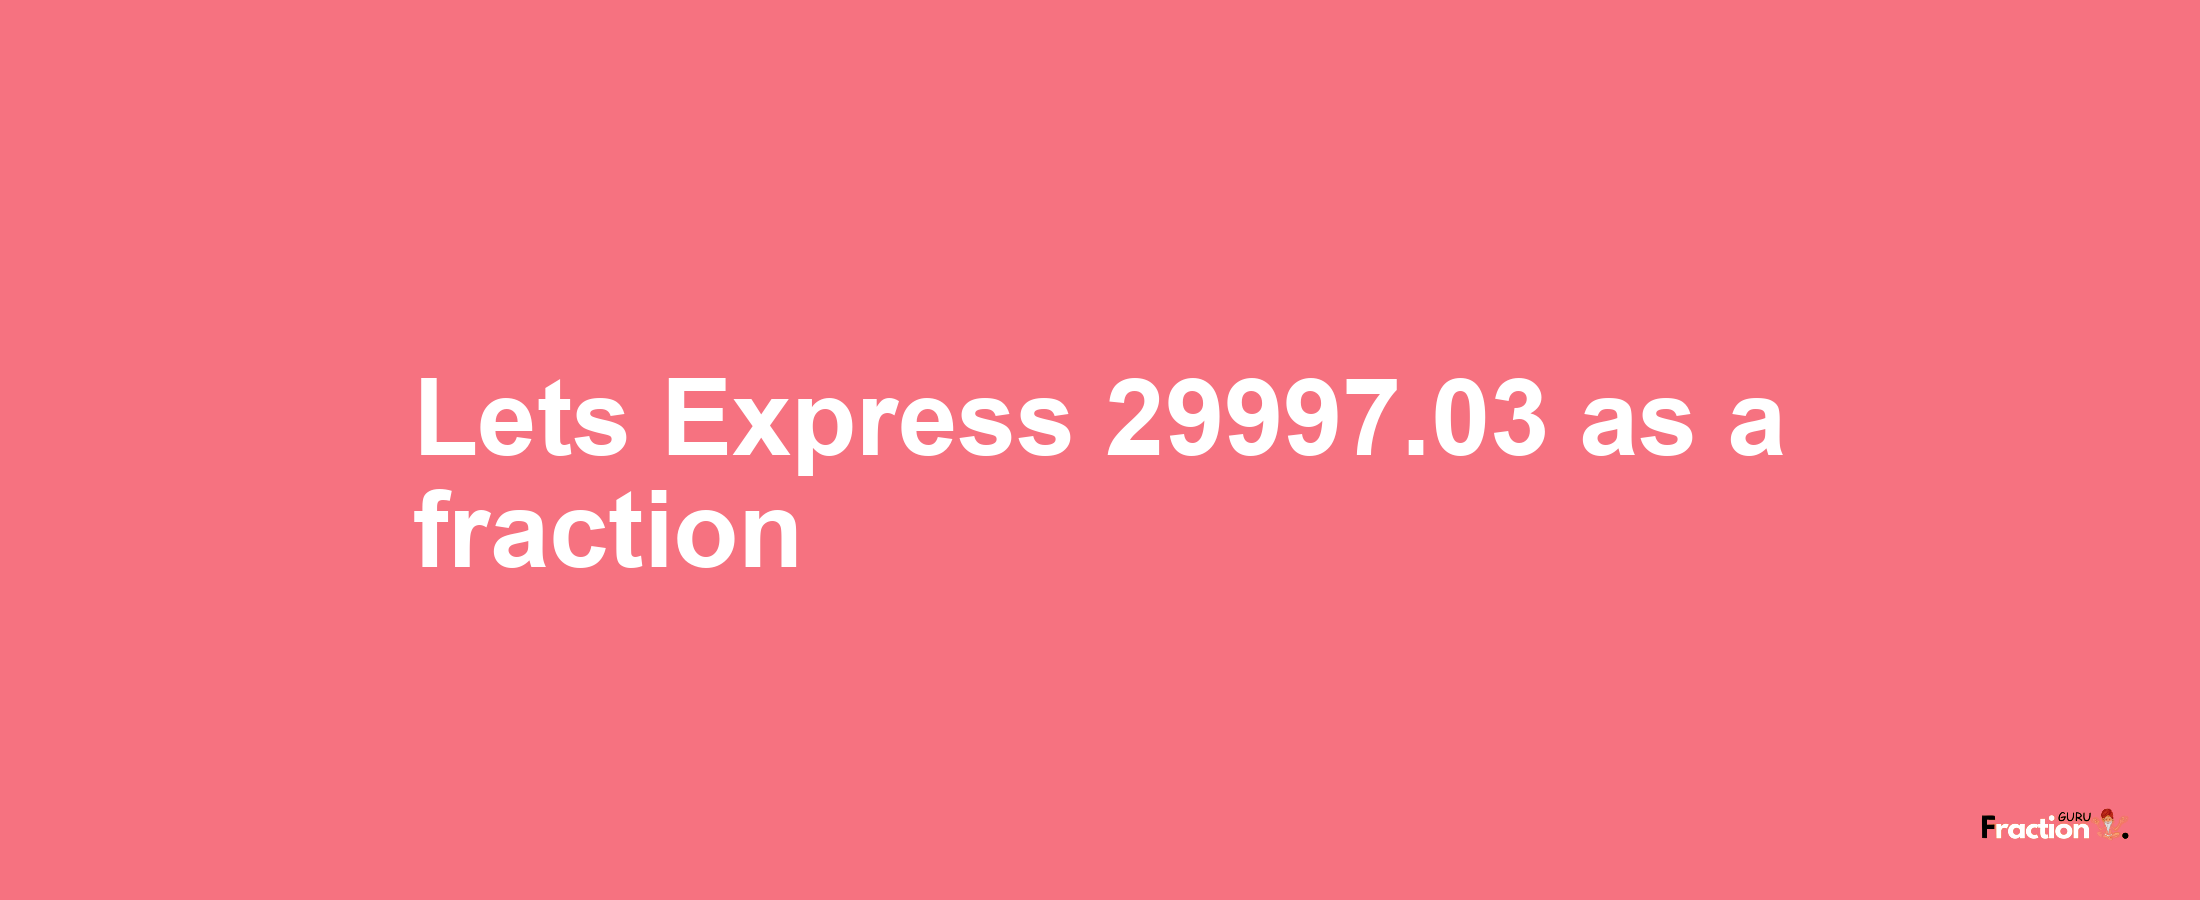 Lets Express 29997.03 as afraction